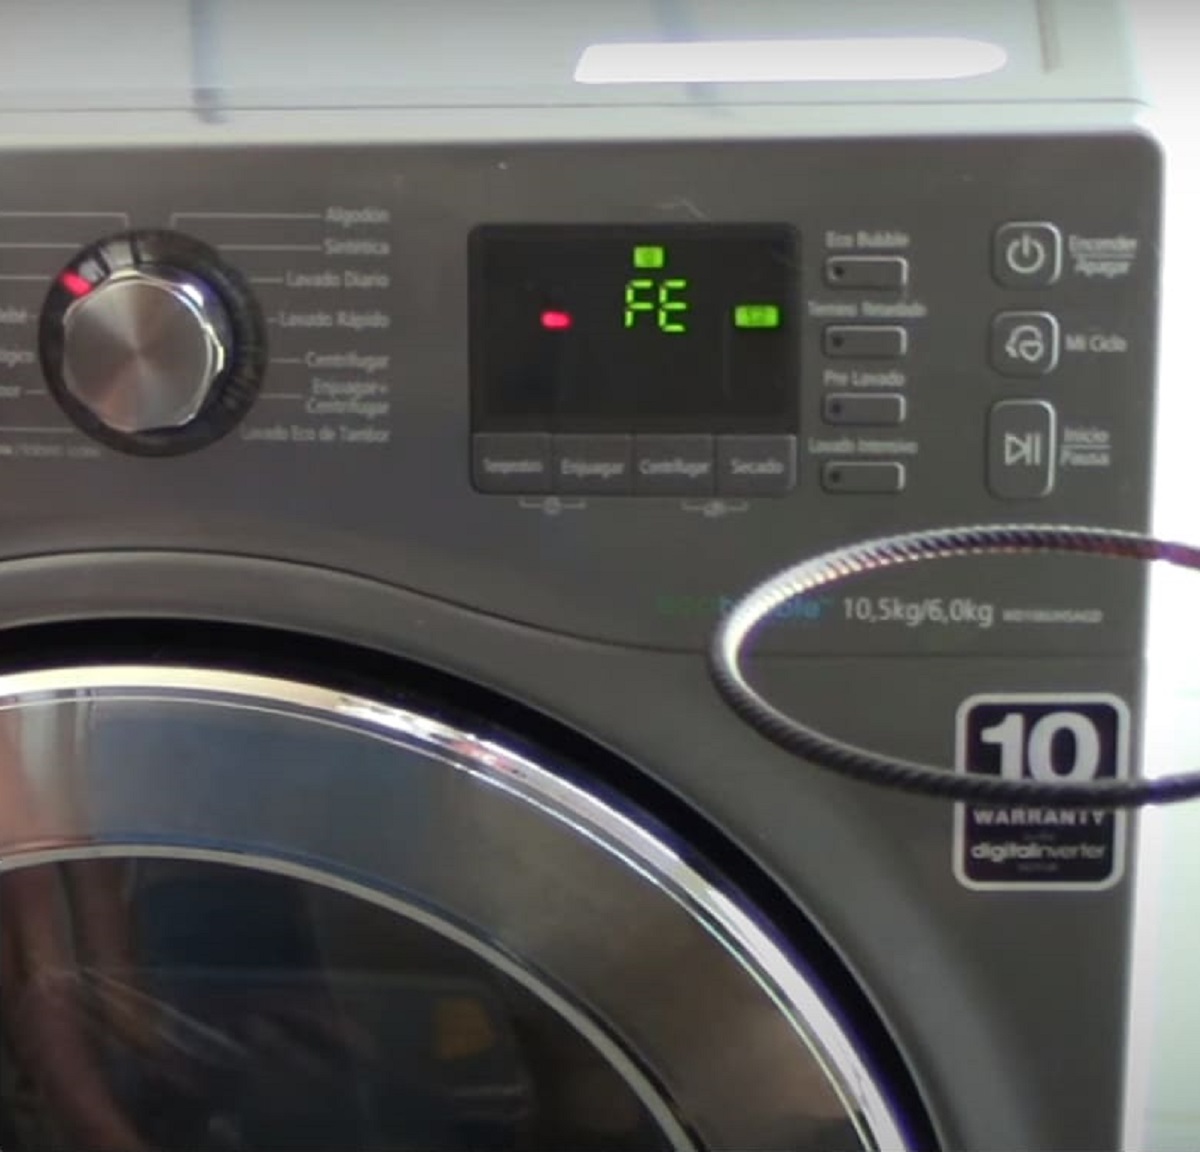 What Does FE Mean On LG Washer